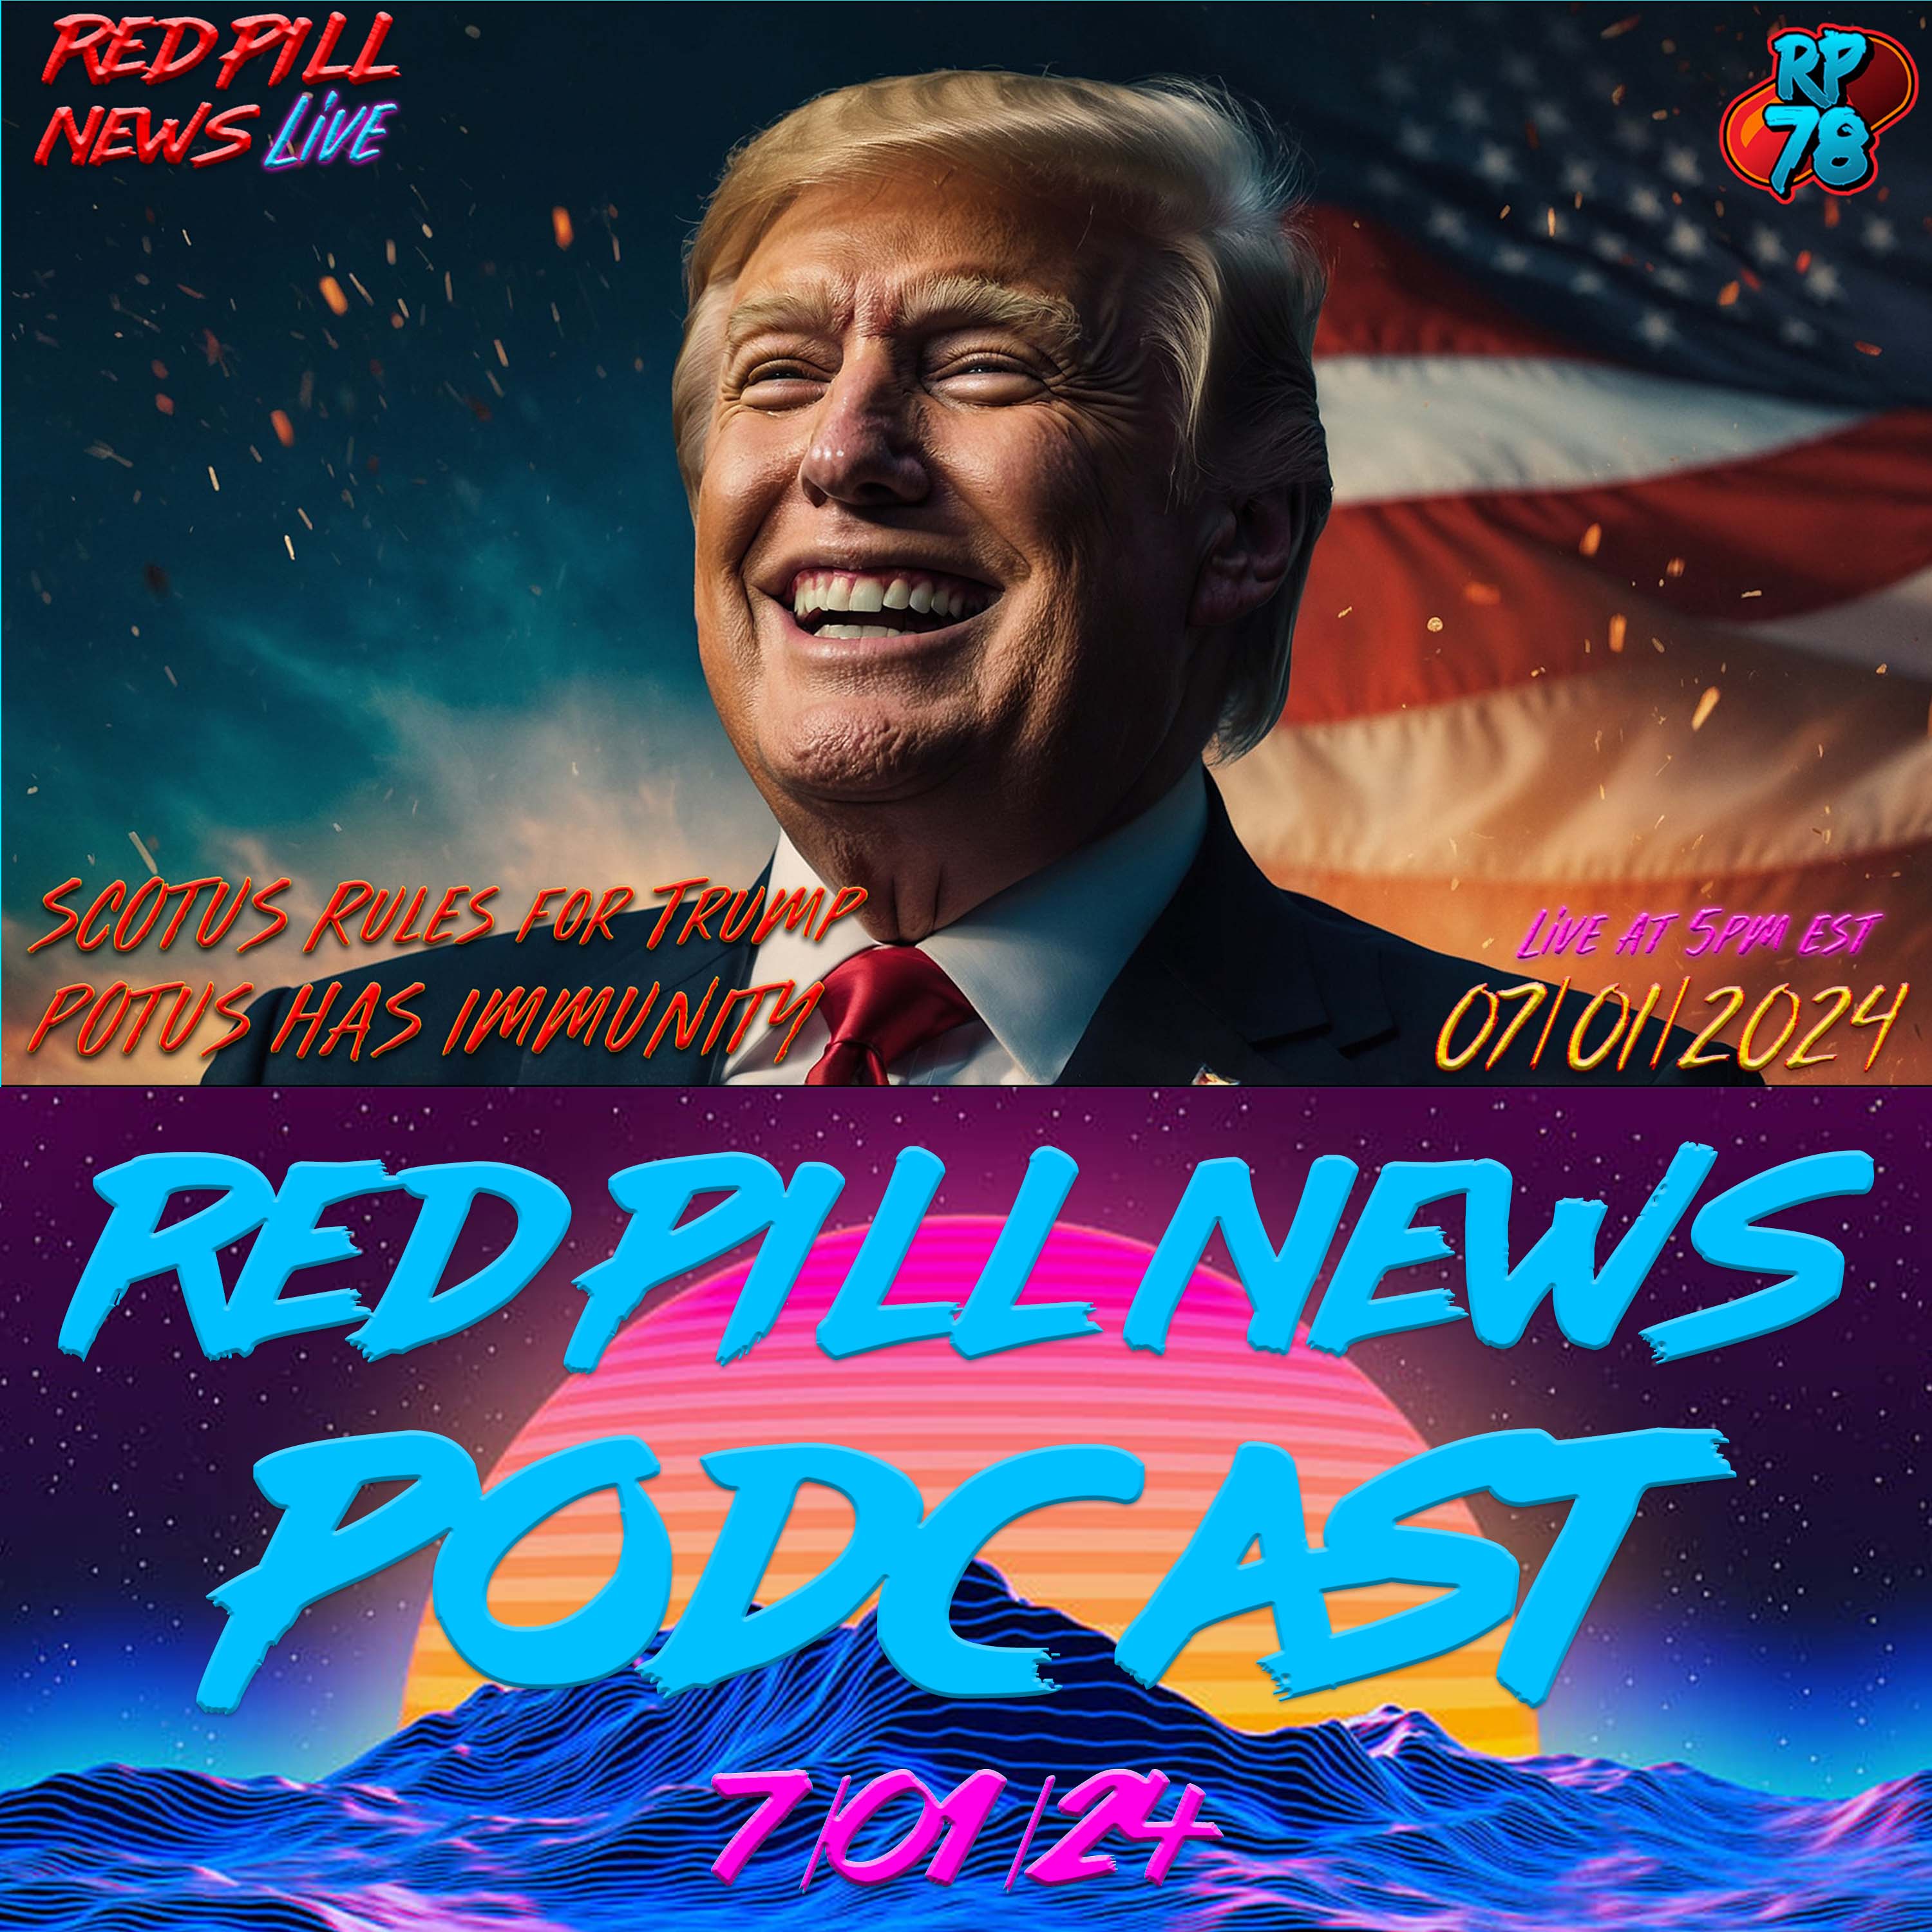 SCOTUS RULES CORRECTLY - TRUMP HAS IMMUNITY on  Red Pill News Live